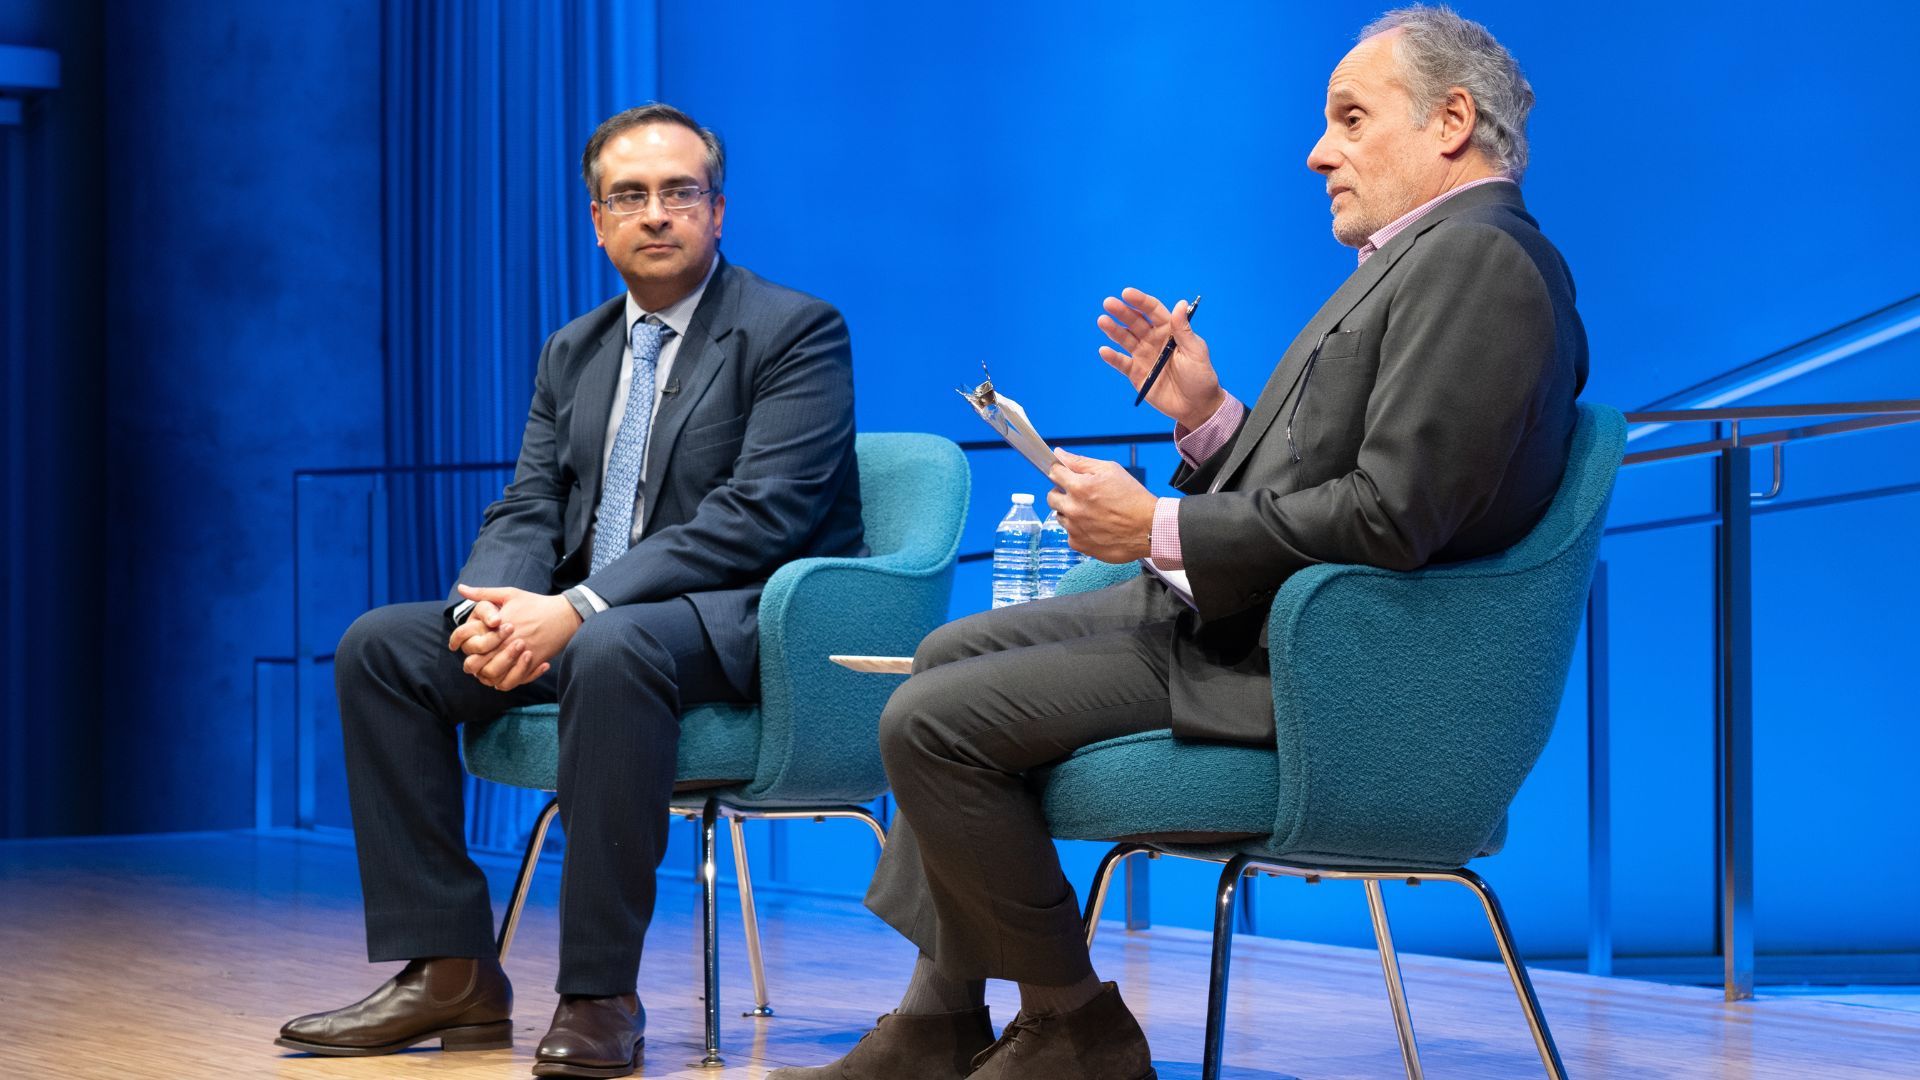 From left: Dr. Sajjan Gohel and Clifford Chanin (speaking) on stage.